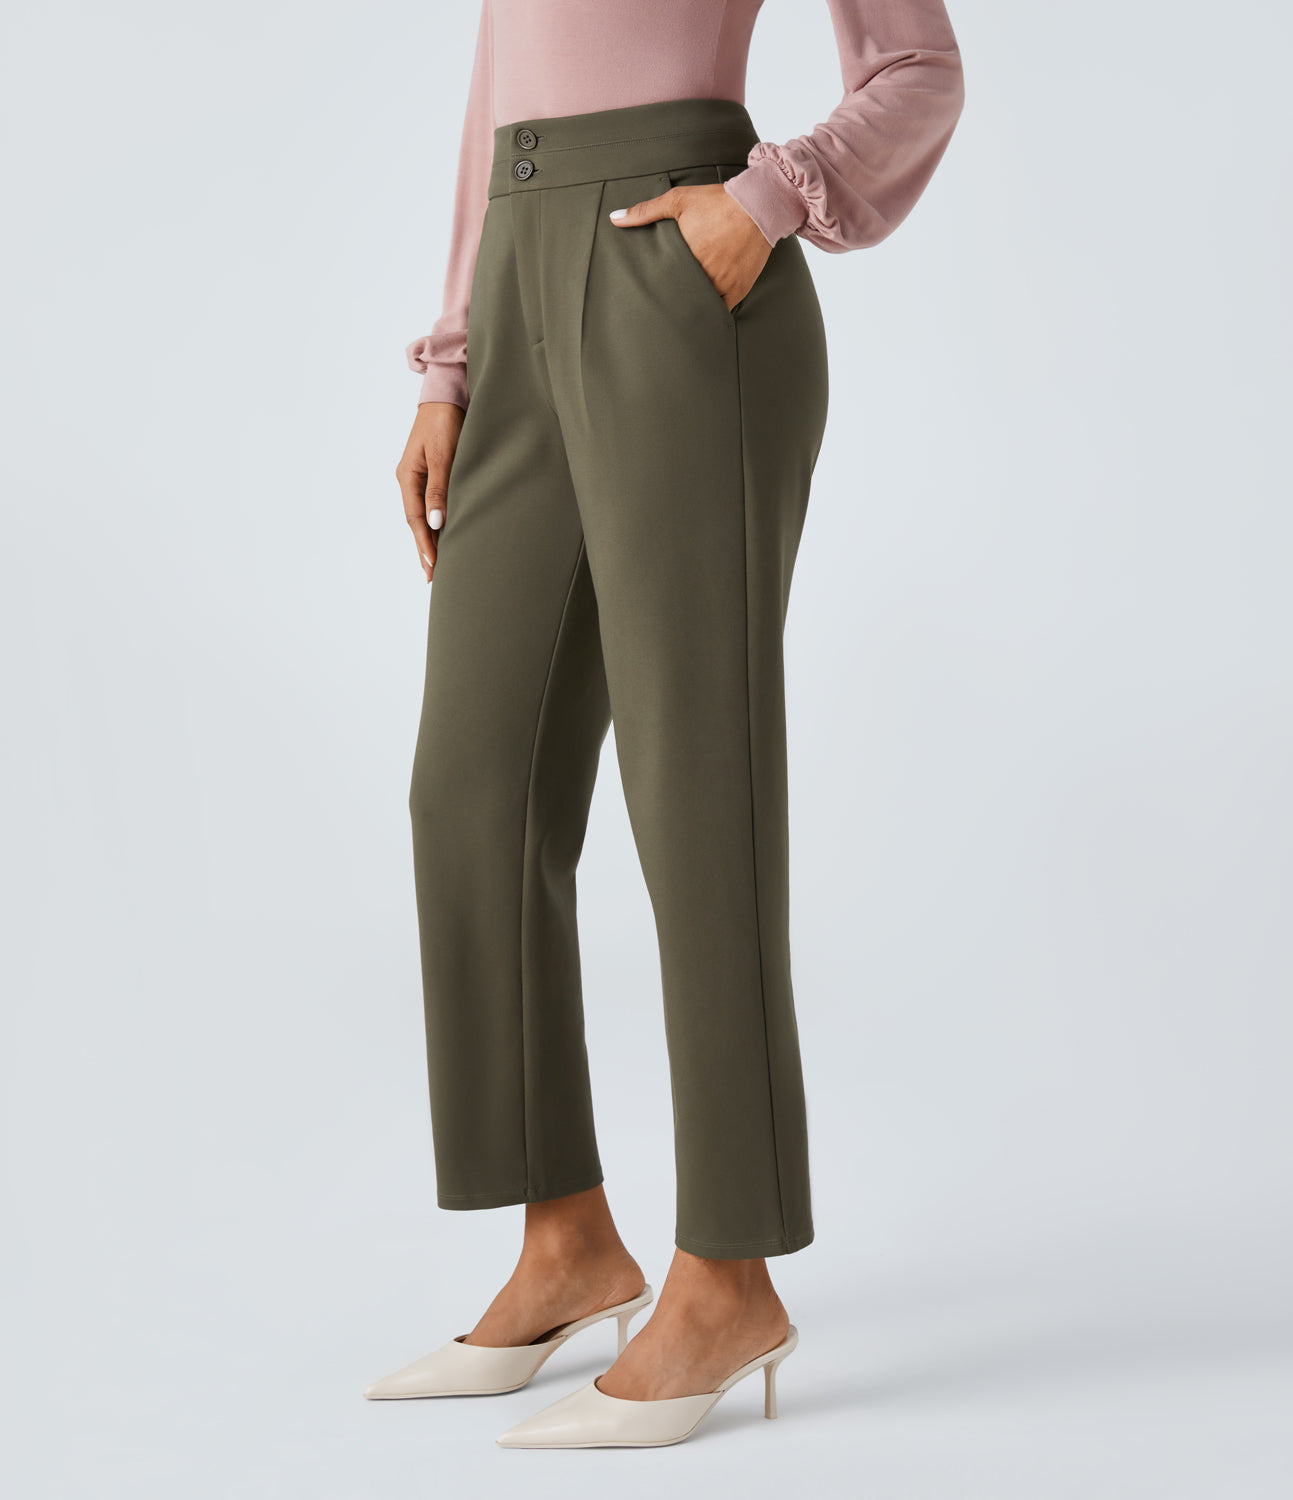 

Halara High Waisted Button Zipper Side Pocket Work Suit Pants - Forest Wild Brown -  sweatpants jogger pants stacked sweatpants